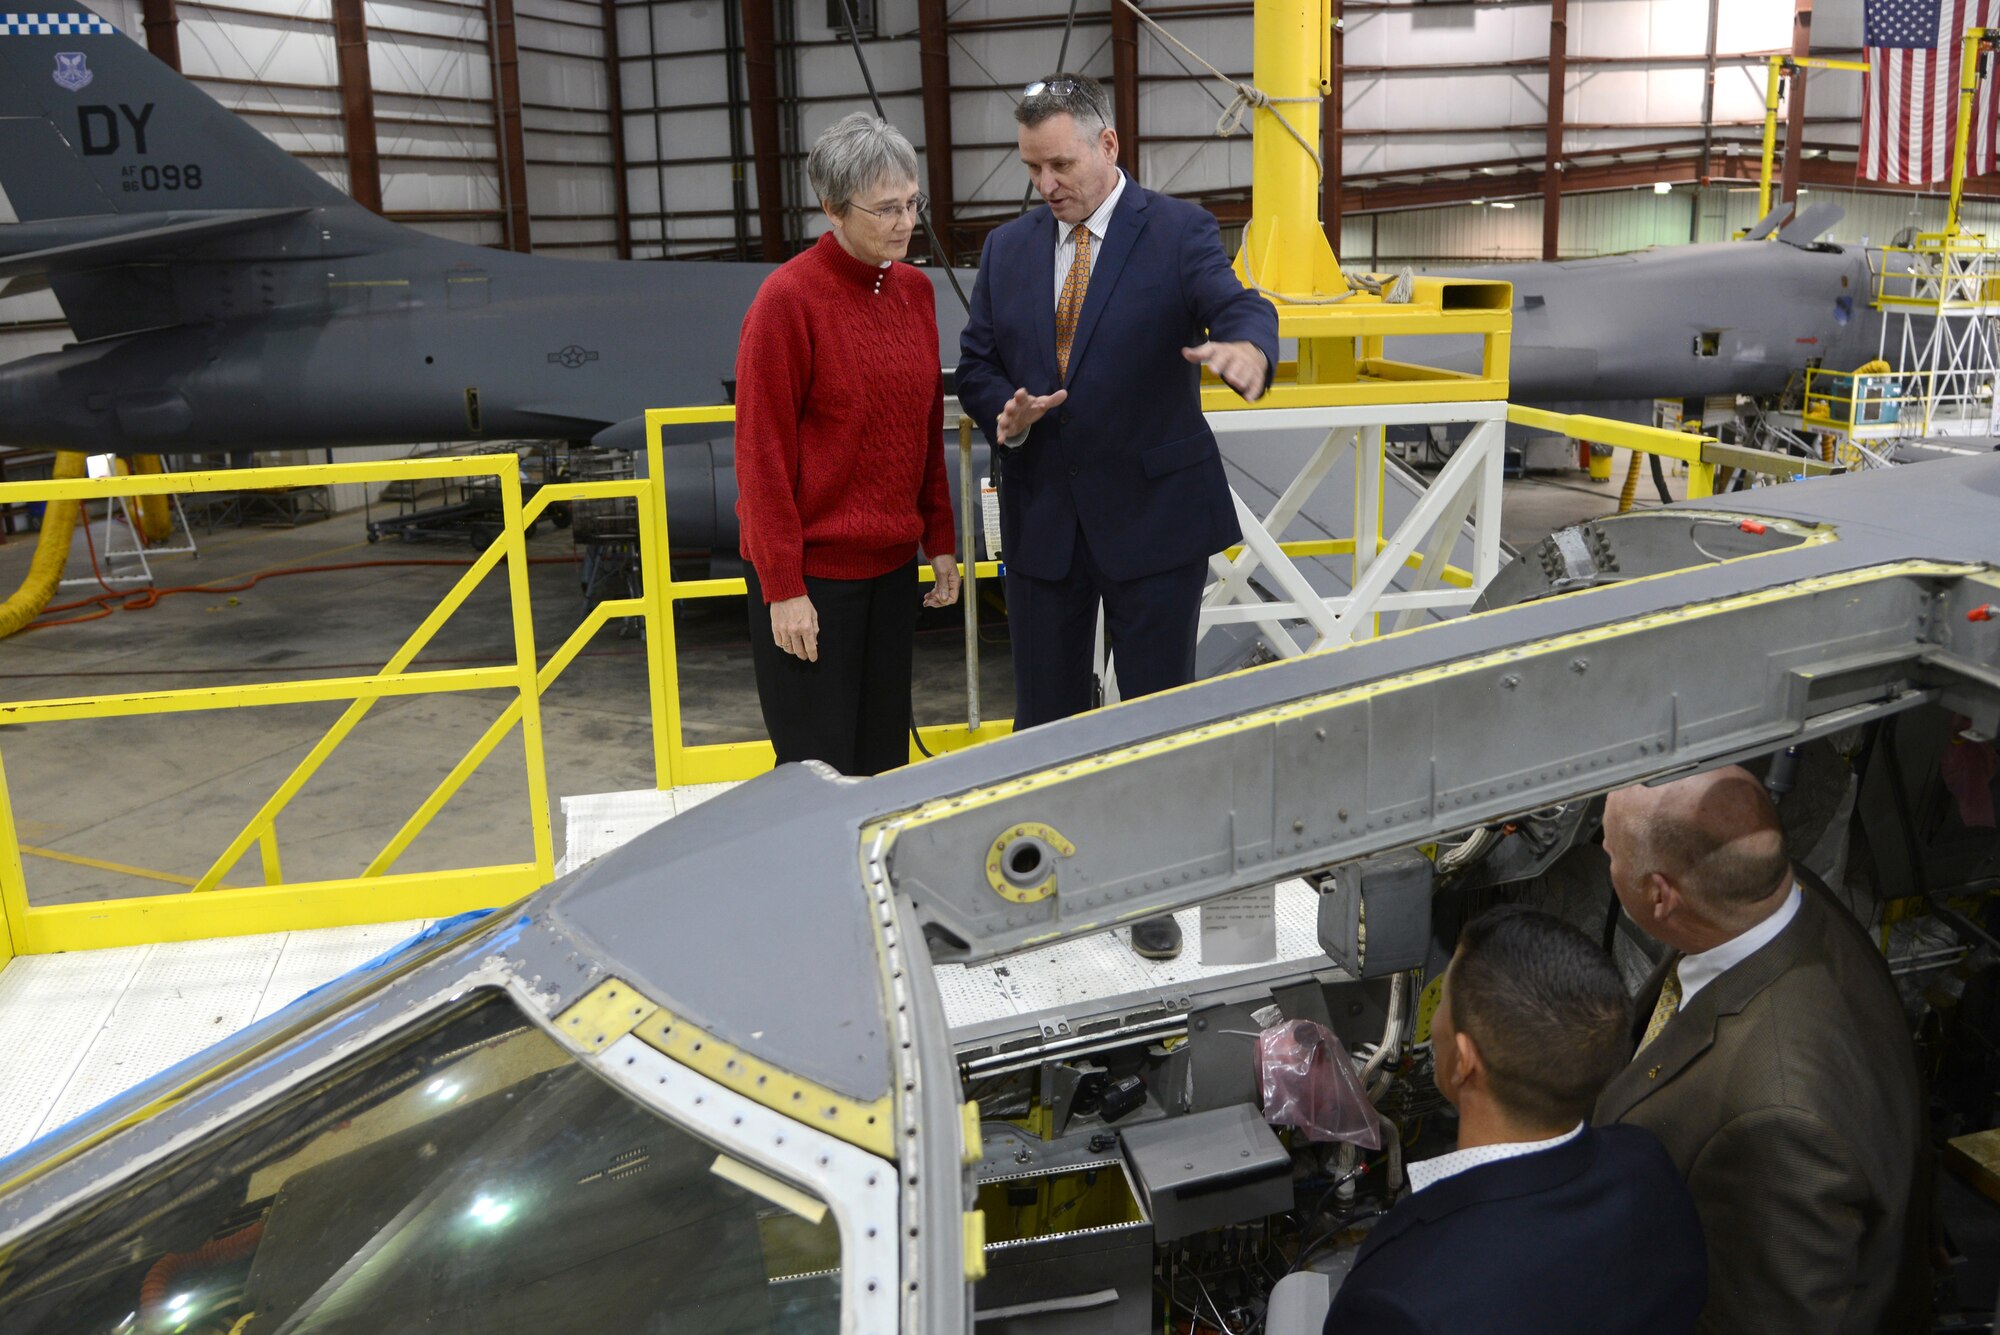 Rodney Shepard, 567th Aircraft Maintenance Squadron deputy director, provides an overview on the B-1 Integrated Battle Station modification operations to Secretary of the Air Force Heather Wilson during her tour of Tinker Air Force Base Nov. 16. Jason Mann, an engineer with the Reverse Engineering and Critical Tooling Lab, bottom left, and Jerry Osborne, 567th AMXS, also provided information on the modifications during her time at the Maintenance Repair and Overhaul Technical Center.